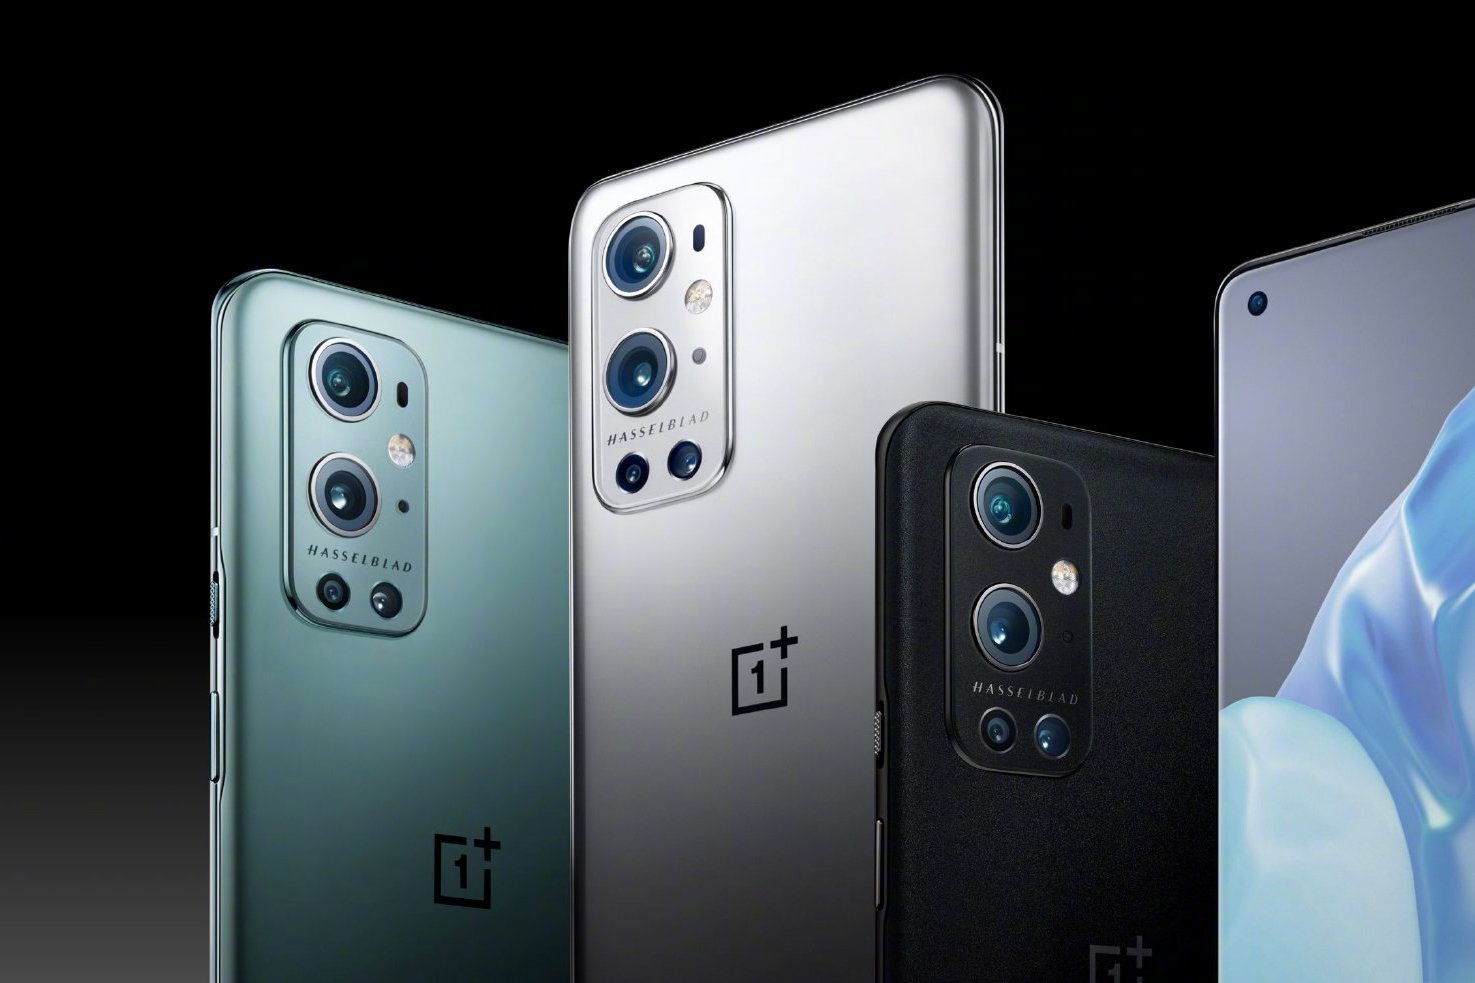 OnePlus 9 series first sale exceeds 300 million yuan in just 10 seconds in China